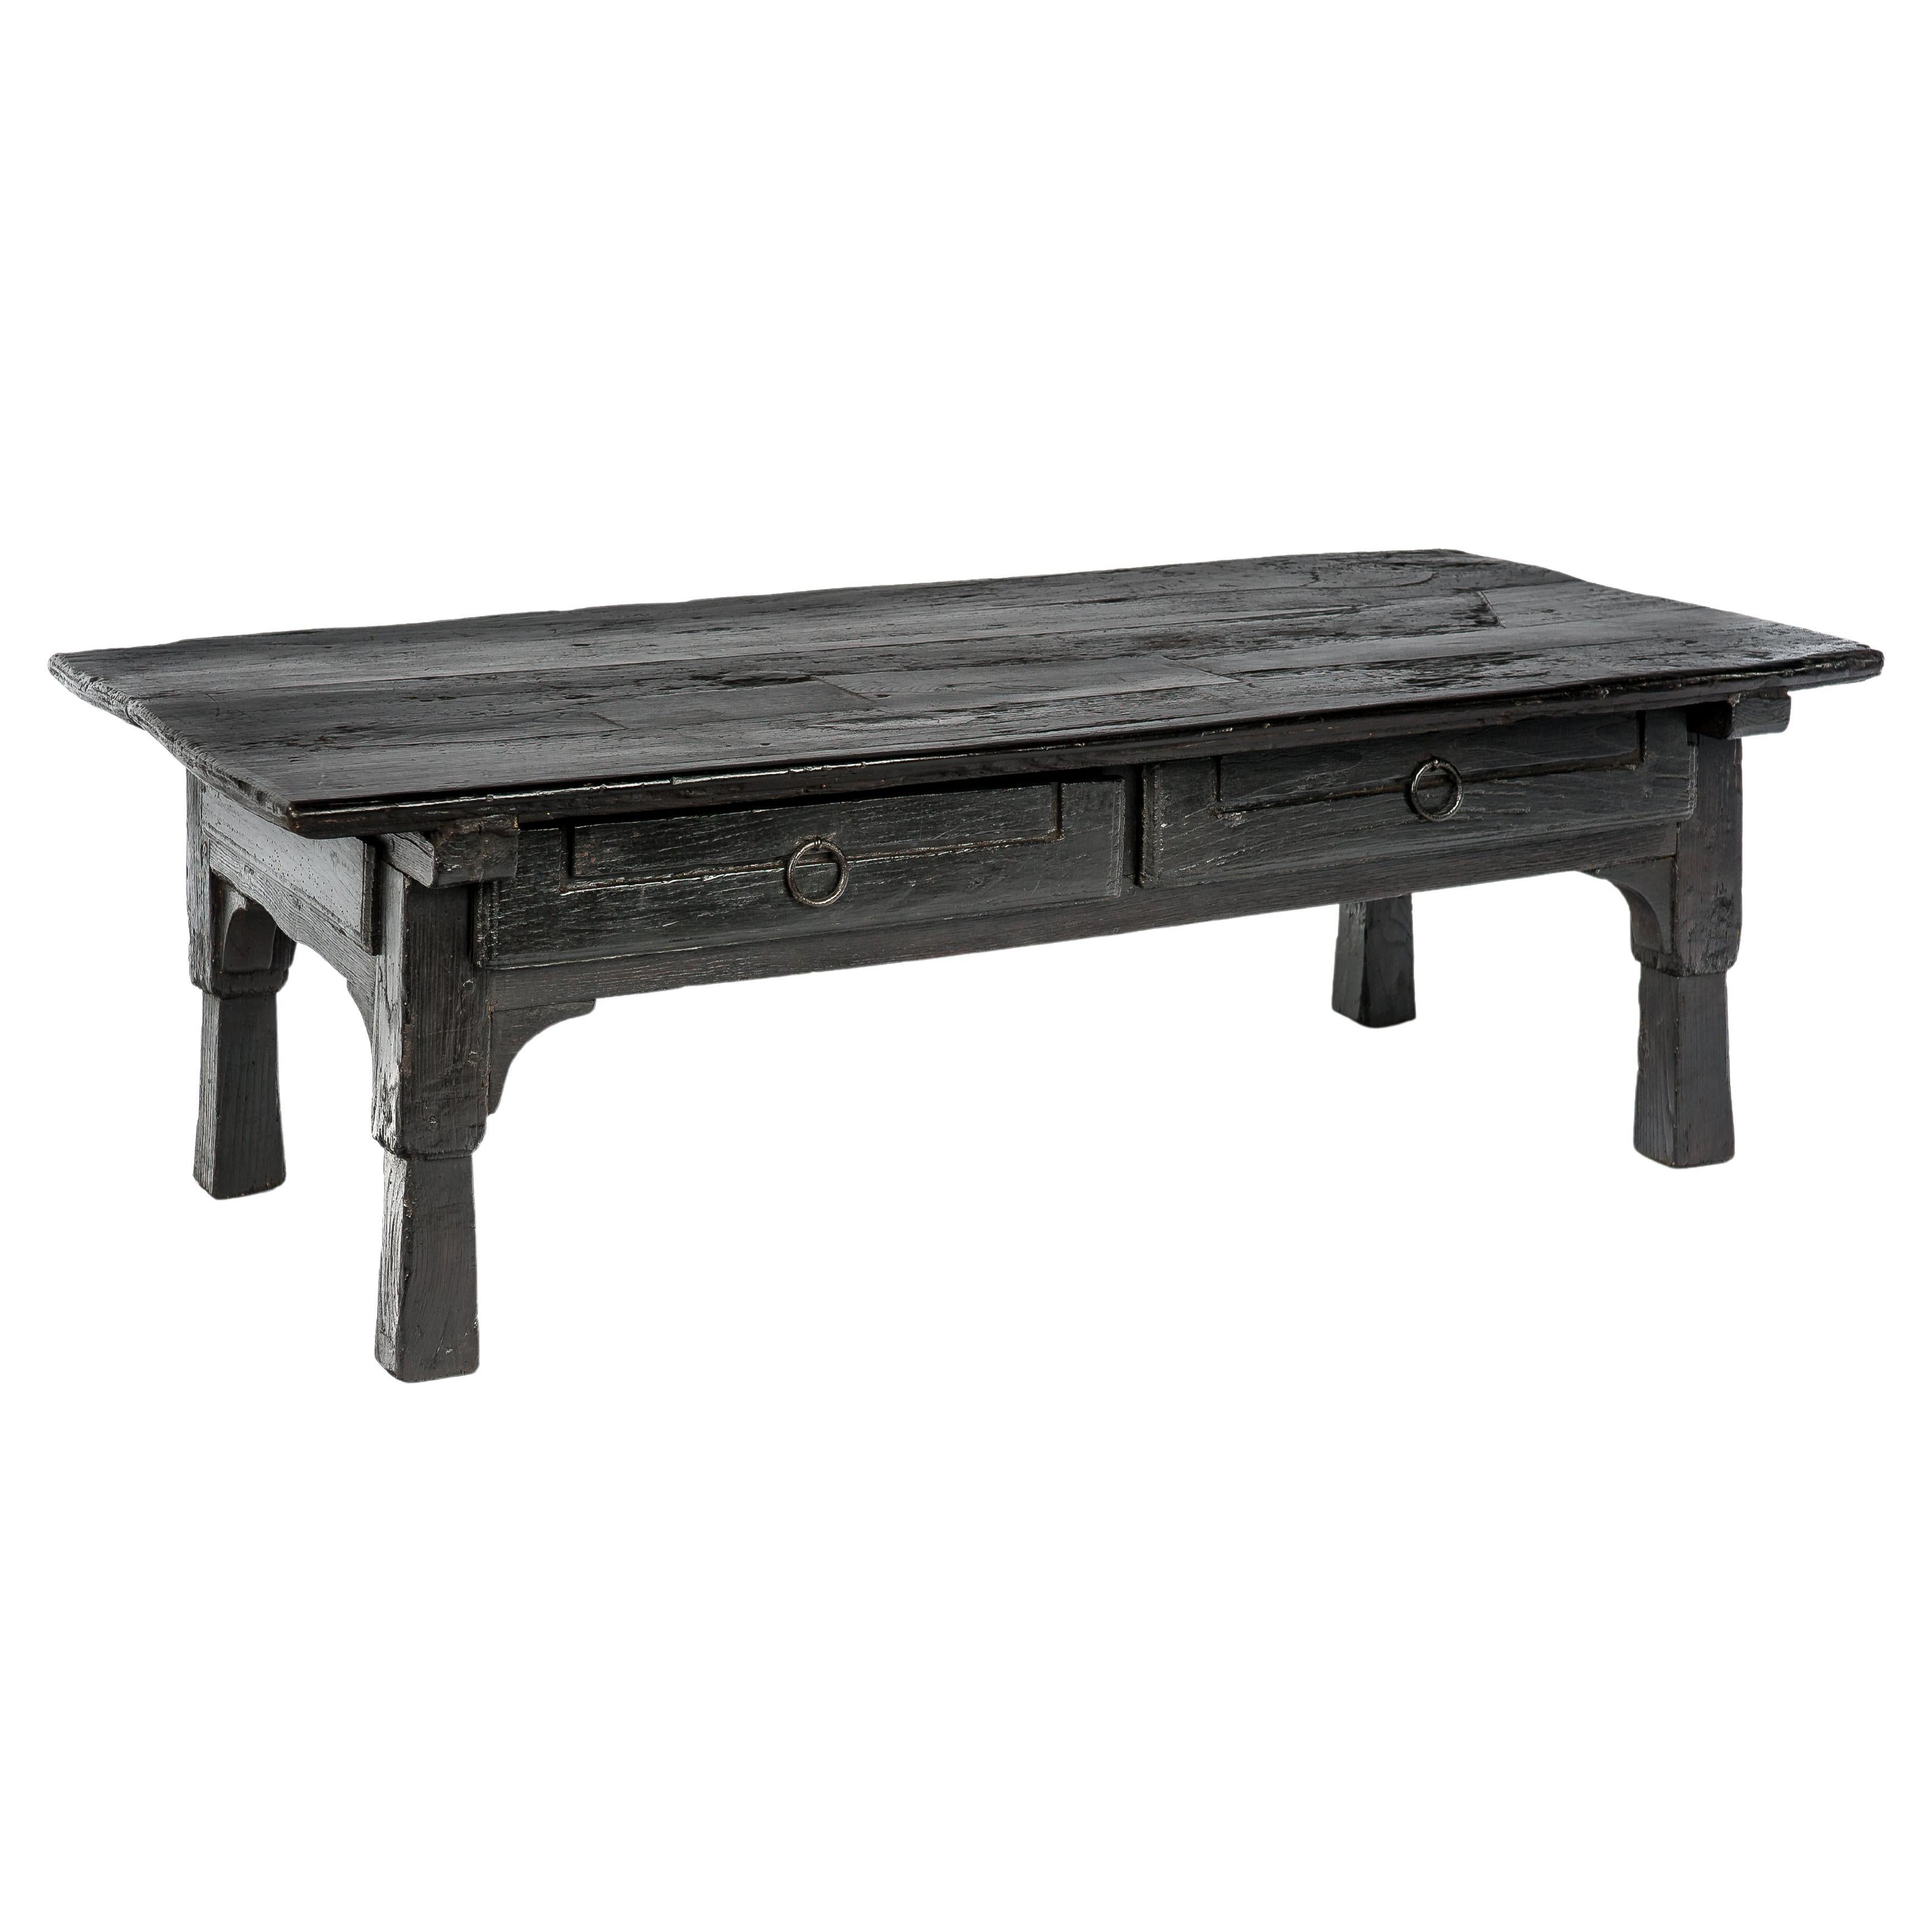 Antique 19th Century Spanish Rustic Black Solid Chestnut Wood Coffee Table For Sale